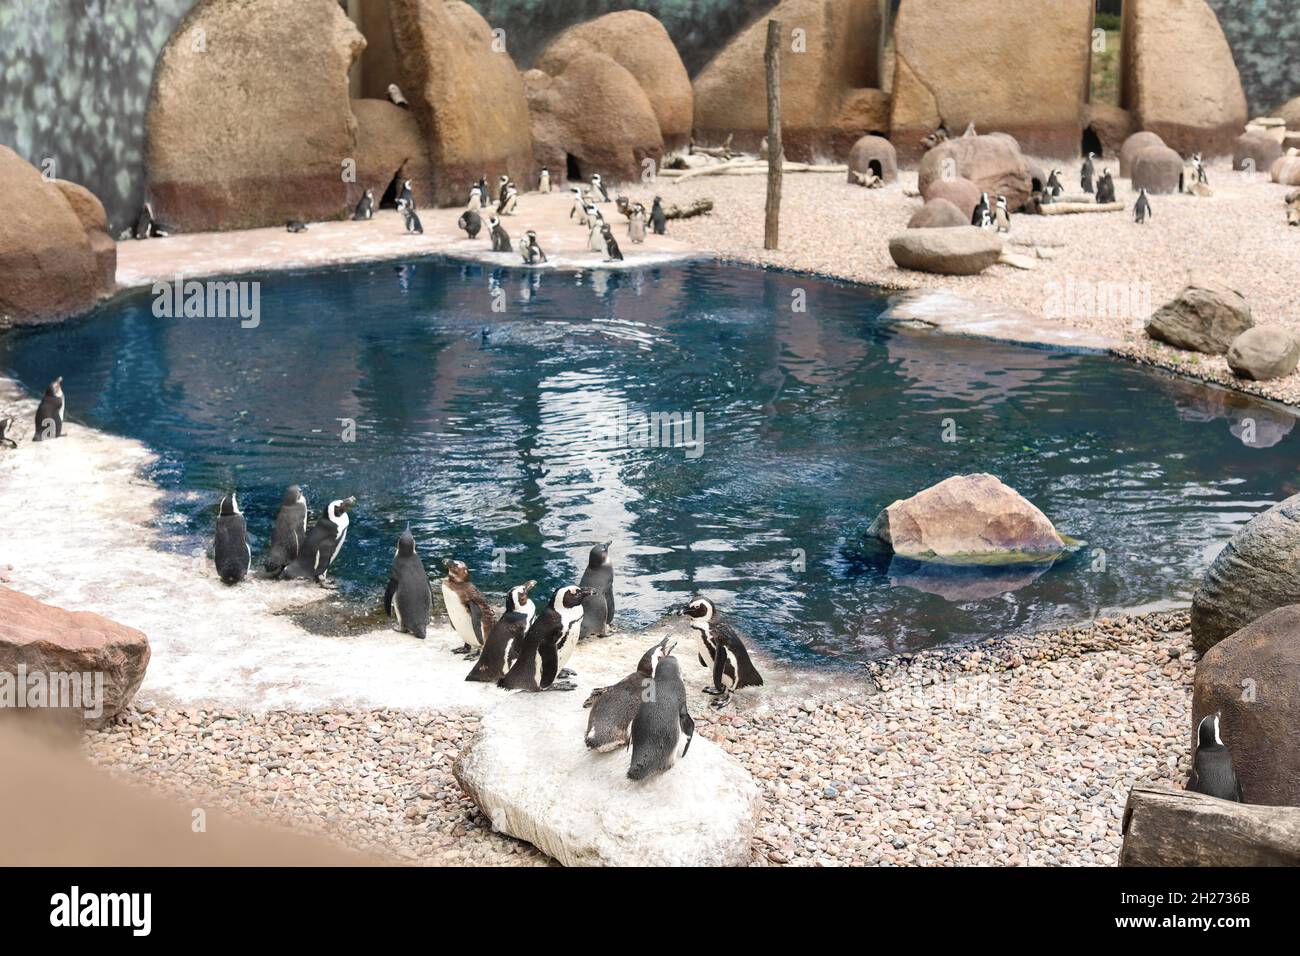 Penguin pavilion with pond in zoological garden Stock Photo